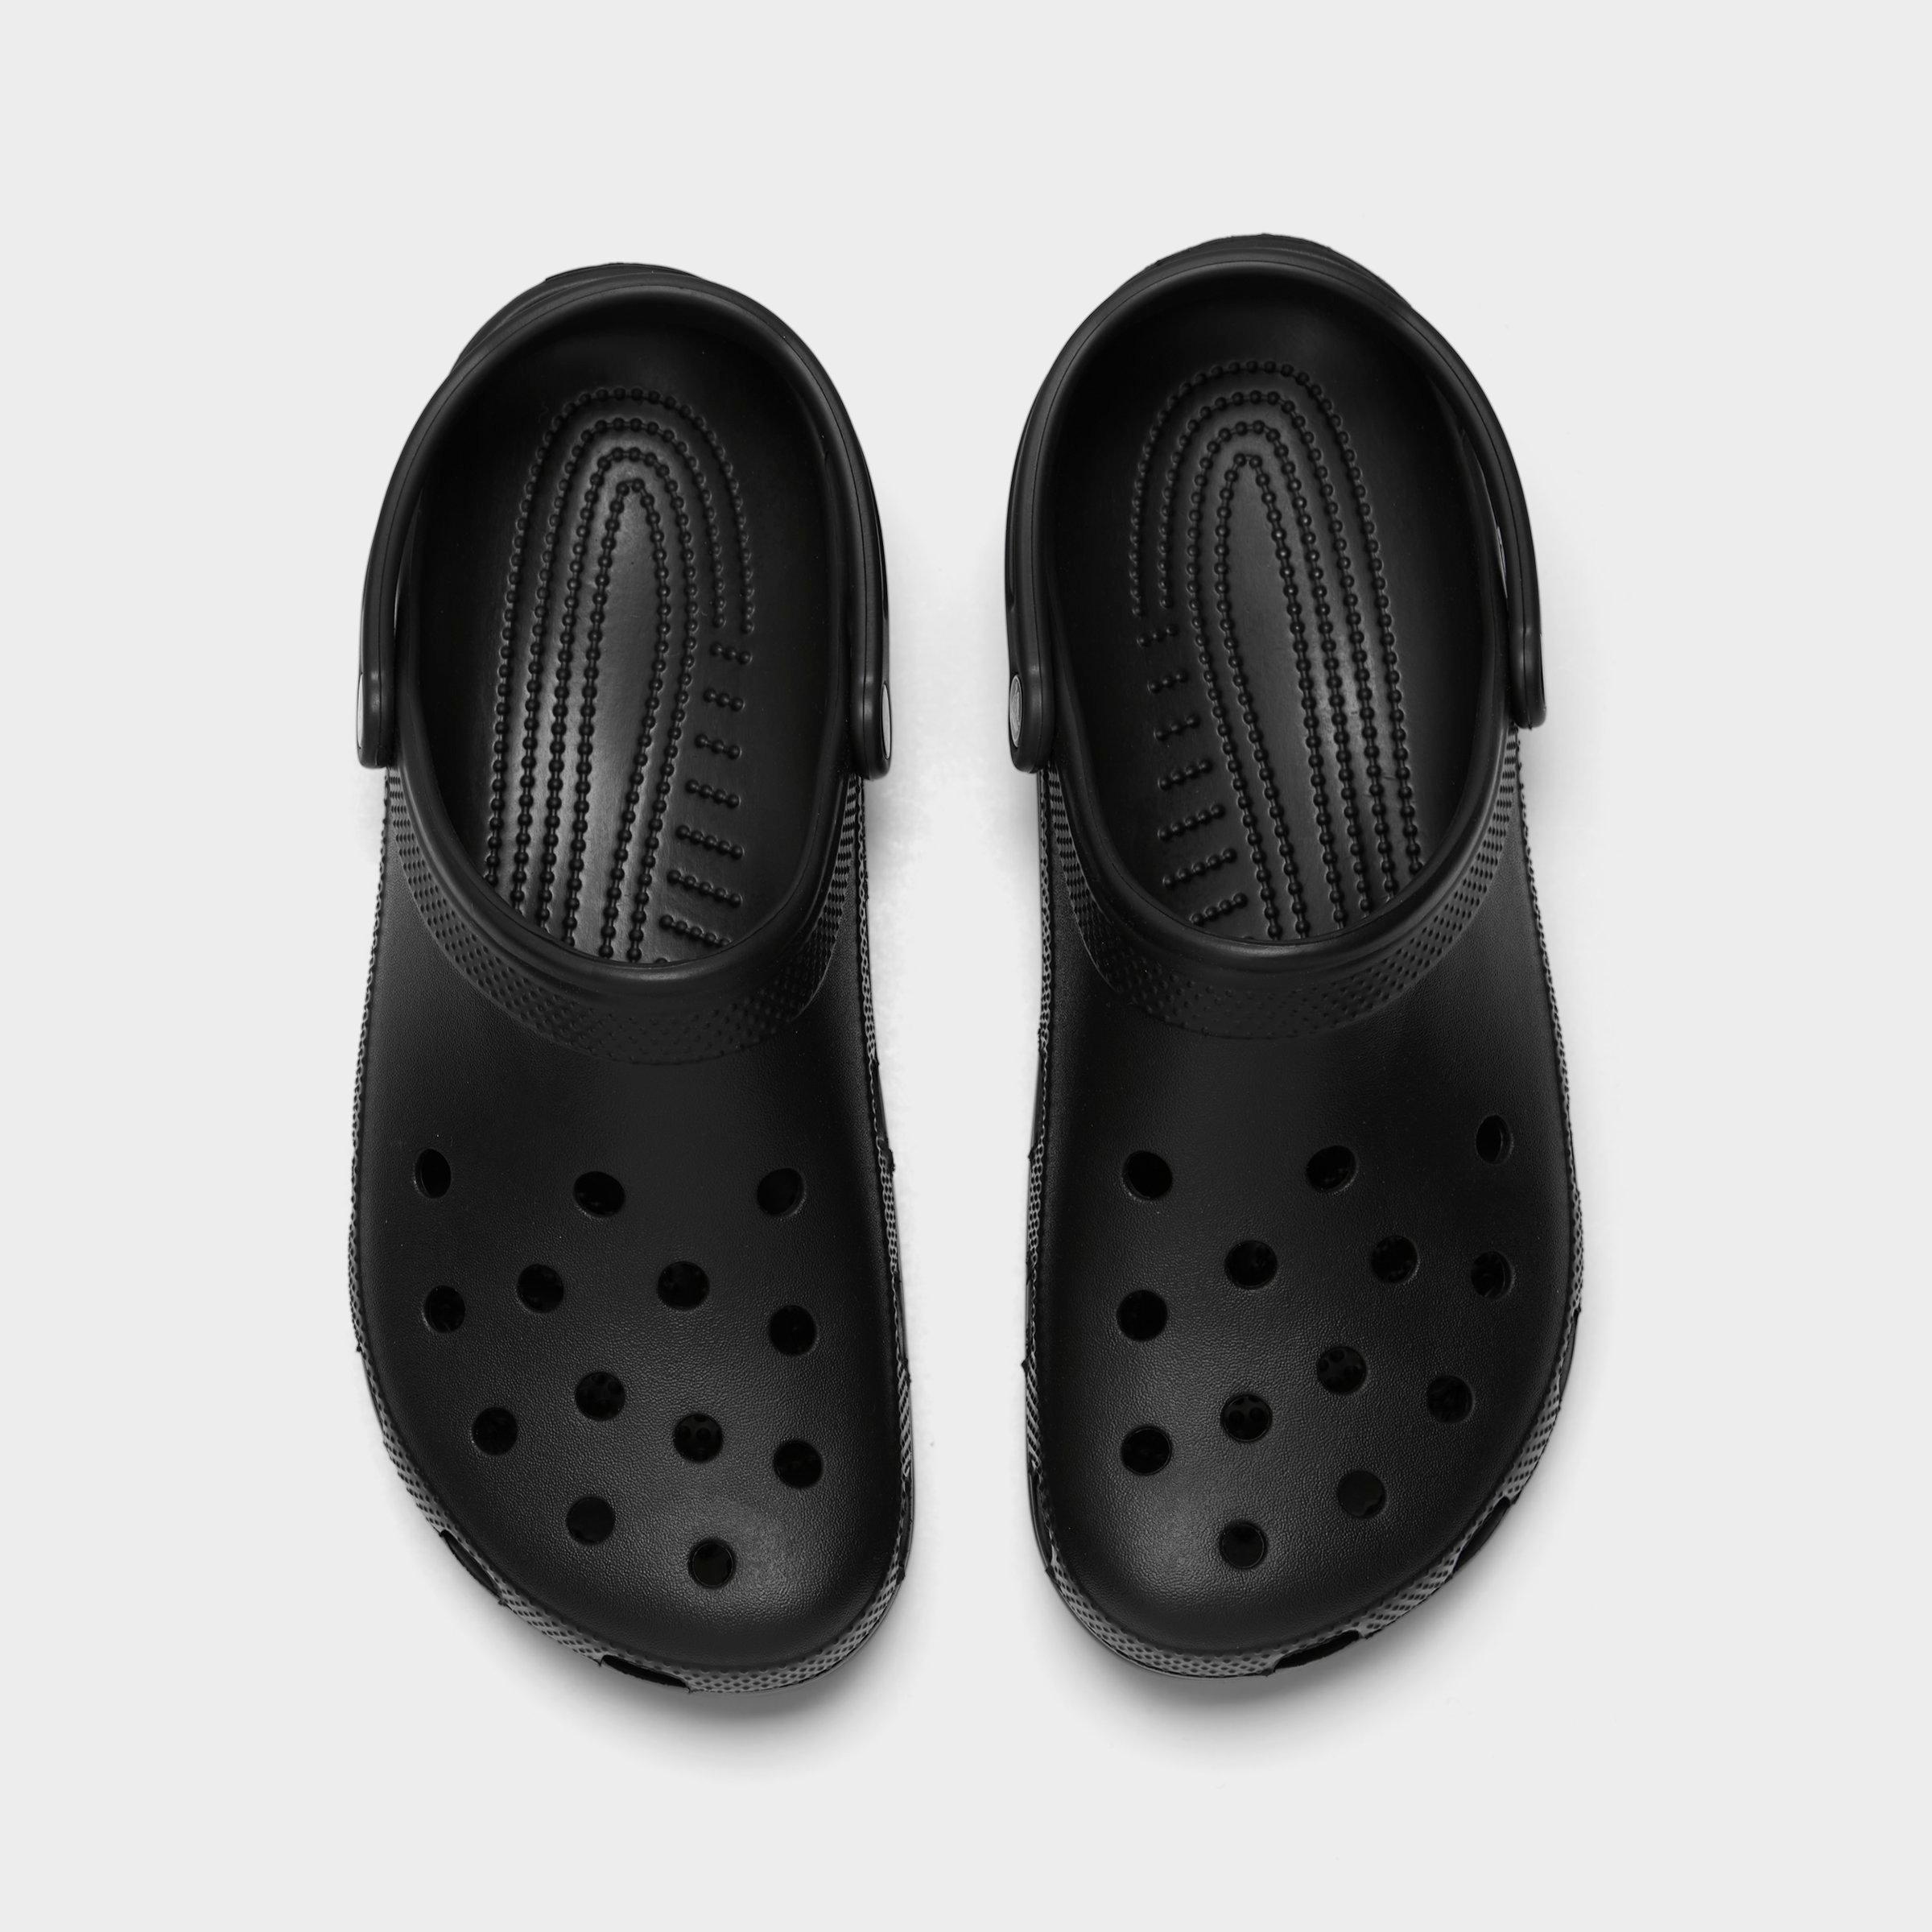 crocs with afterpay